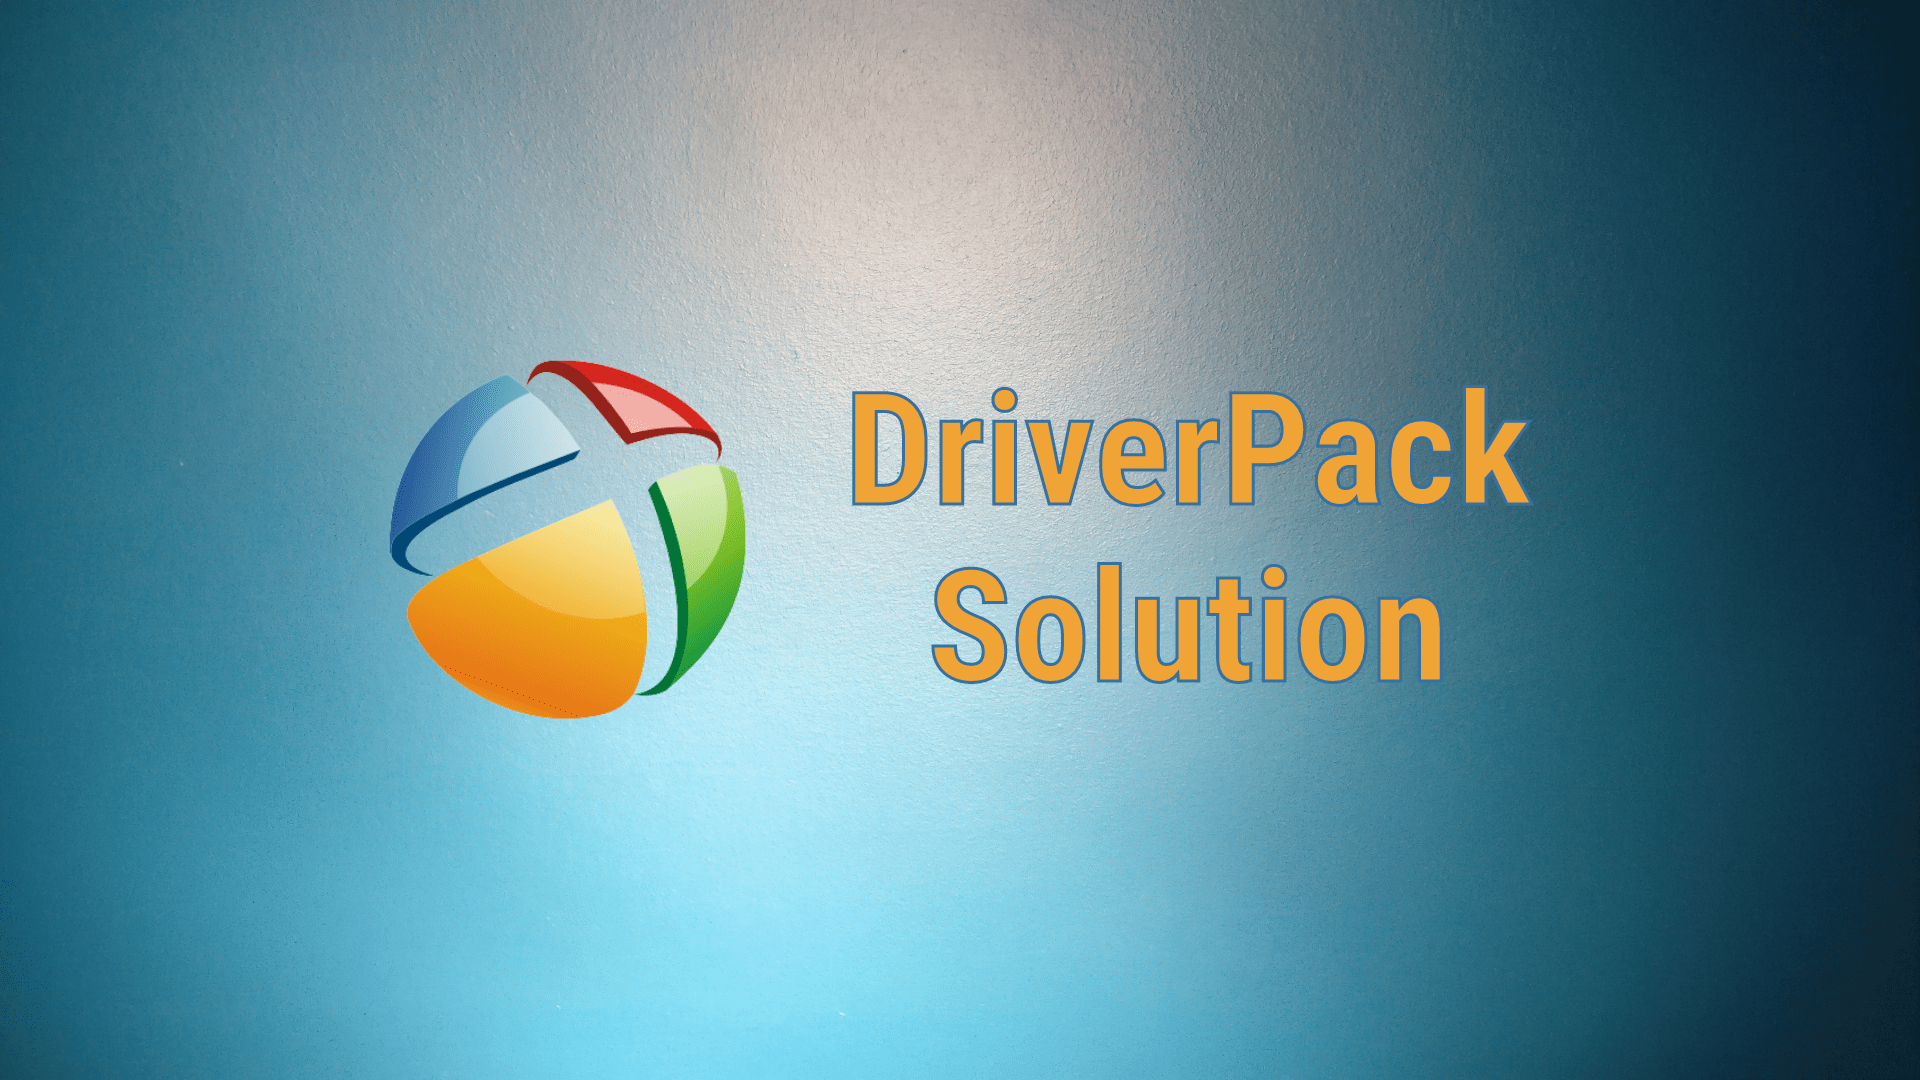 driverpack download for windows 10